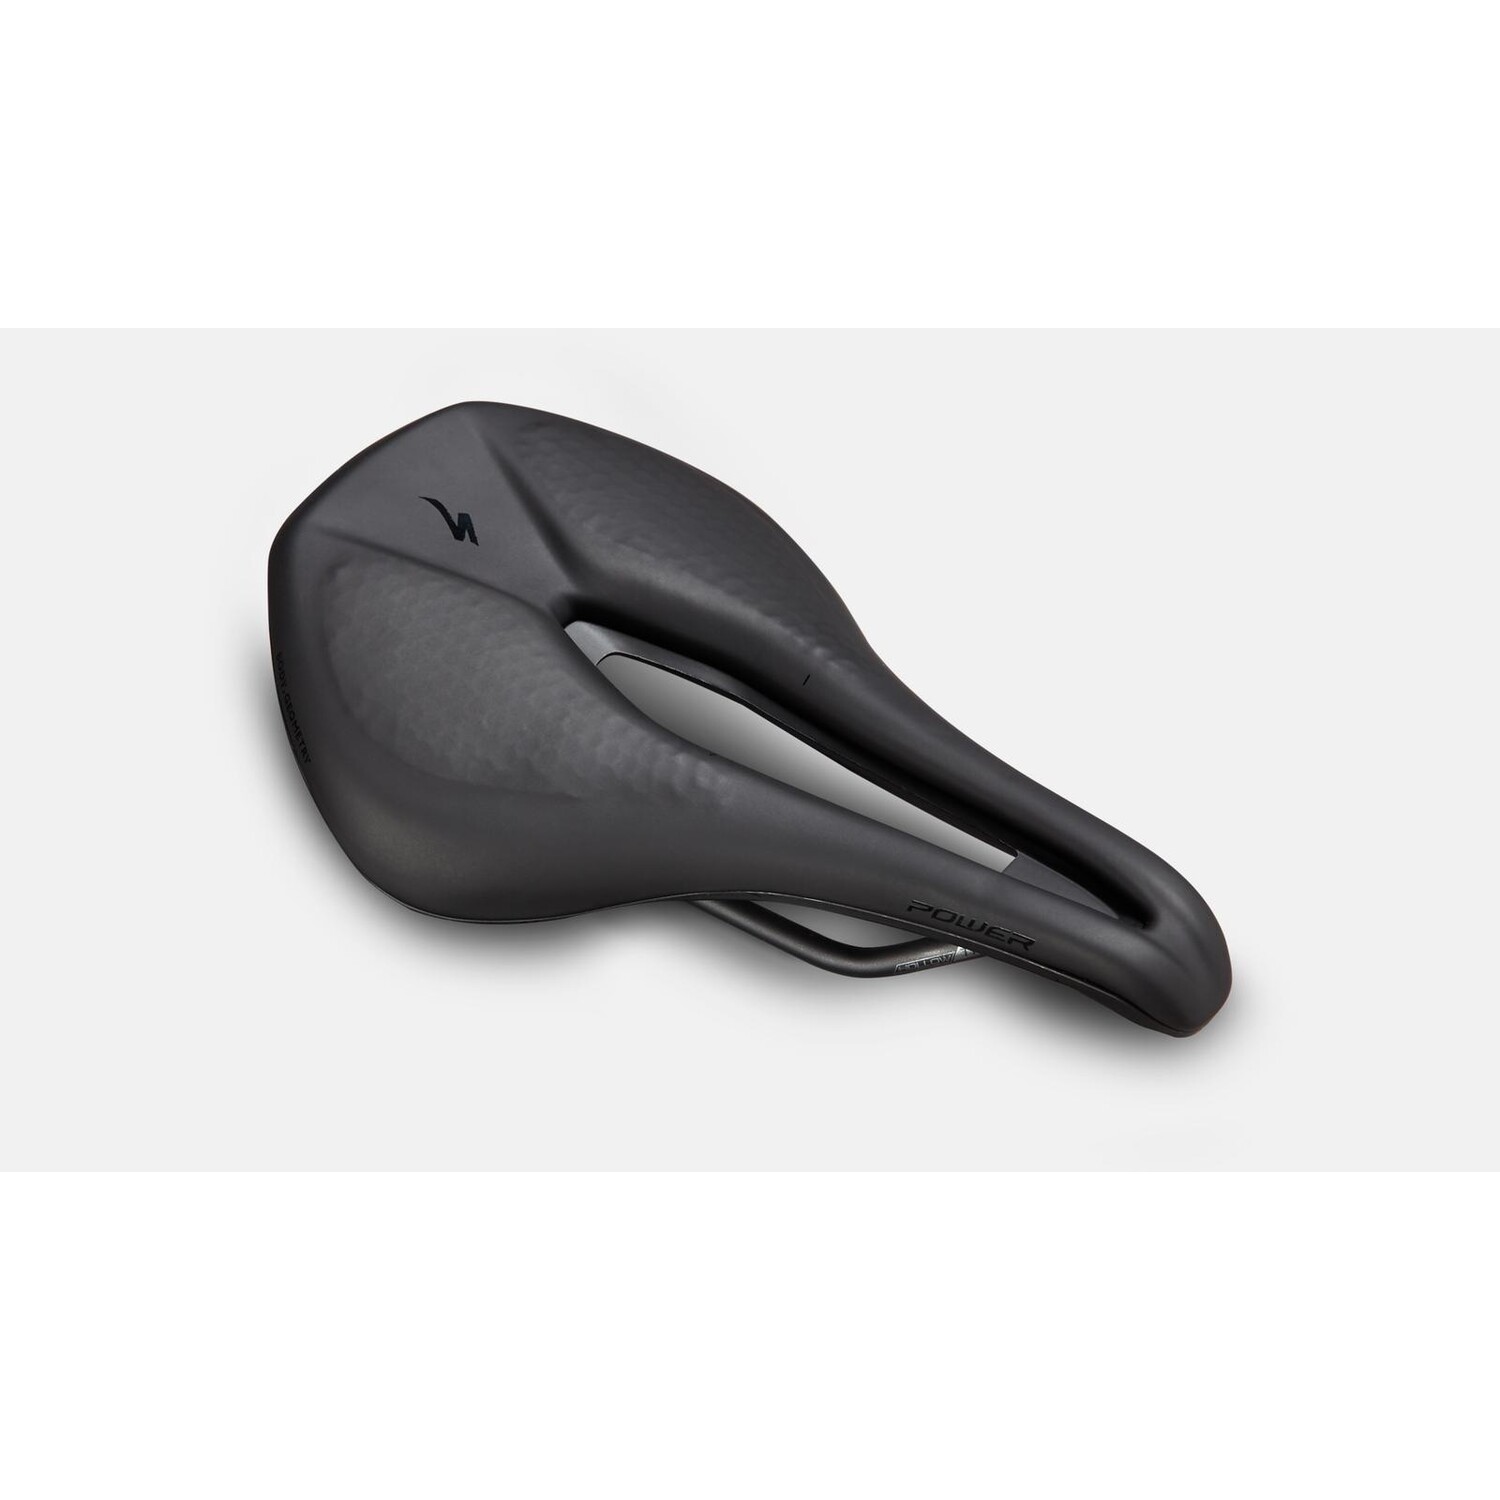 Specialized Specialized Power Expert Mirror Saddle 143mm